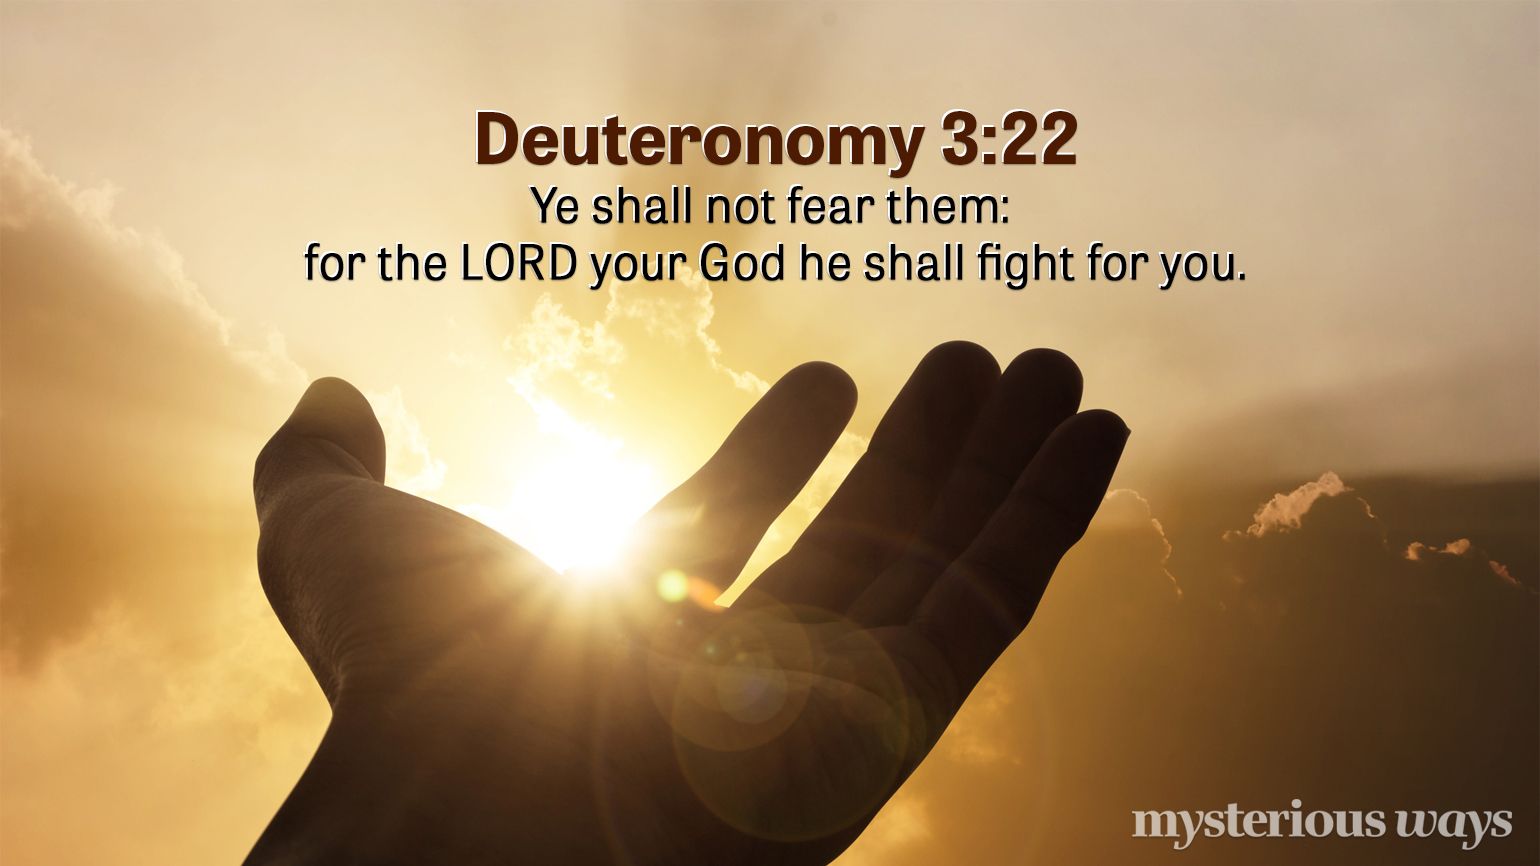 Deuteronomy 3:22 “ ‘You must not fear them, for the LORD your God Himself fights for you.’”